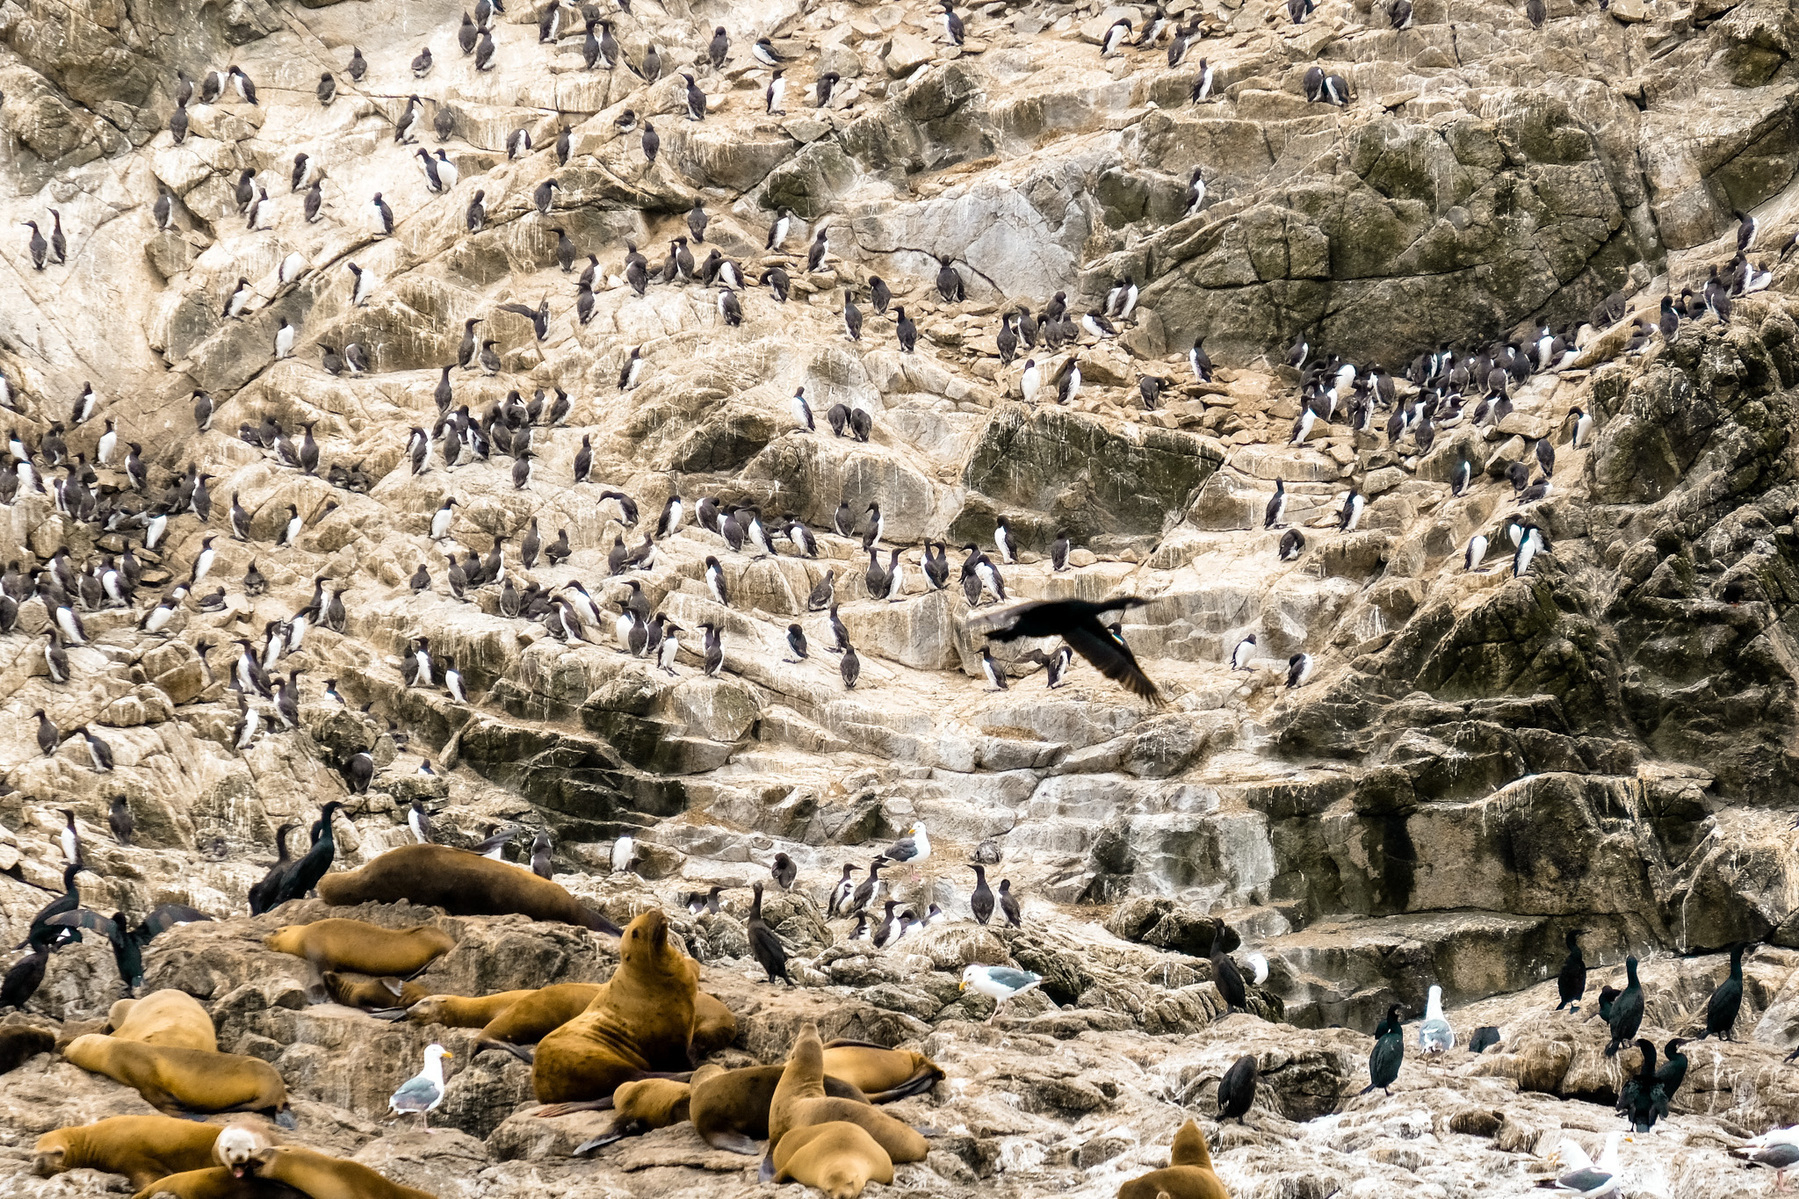 Dozens of penguins sitting on a huge rock, next to sea lions. Overhead, a bird flies past. Some gulls too.